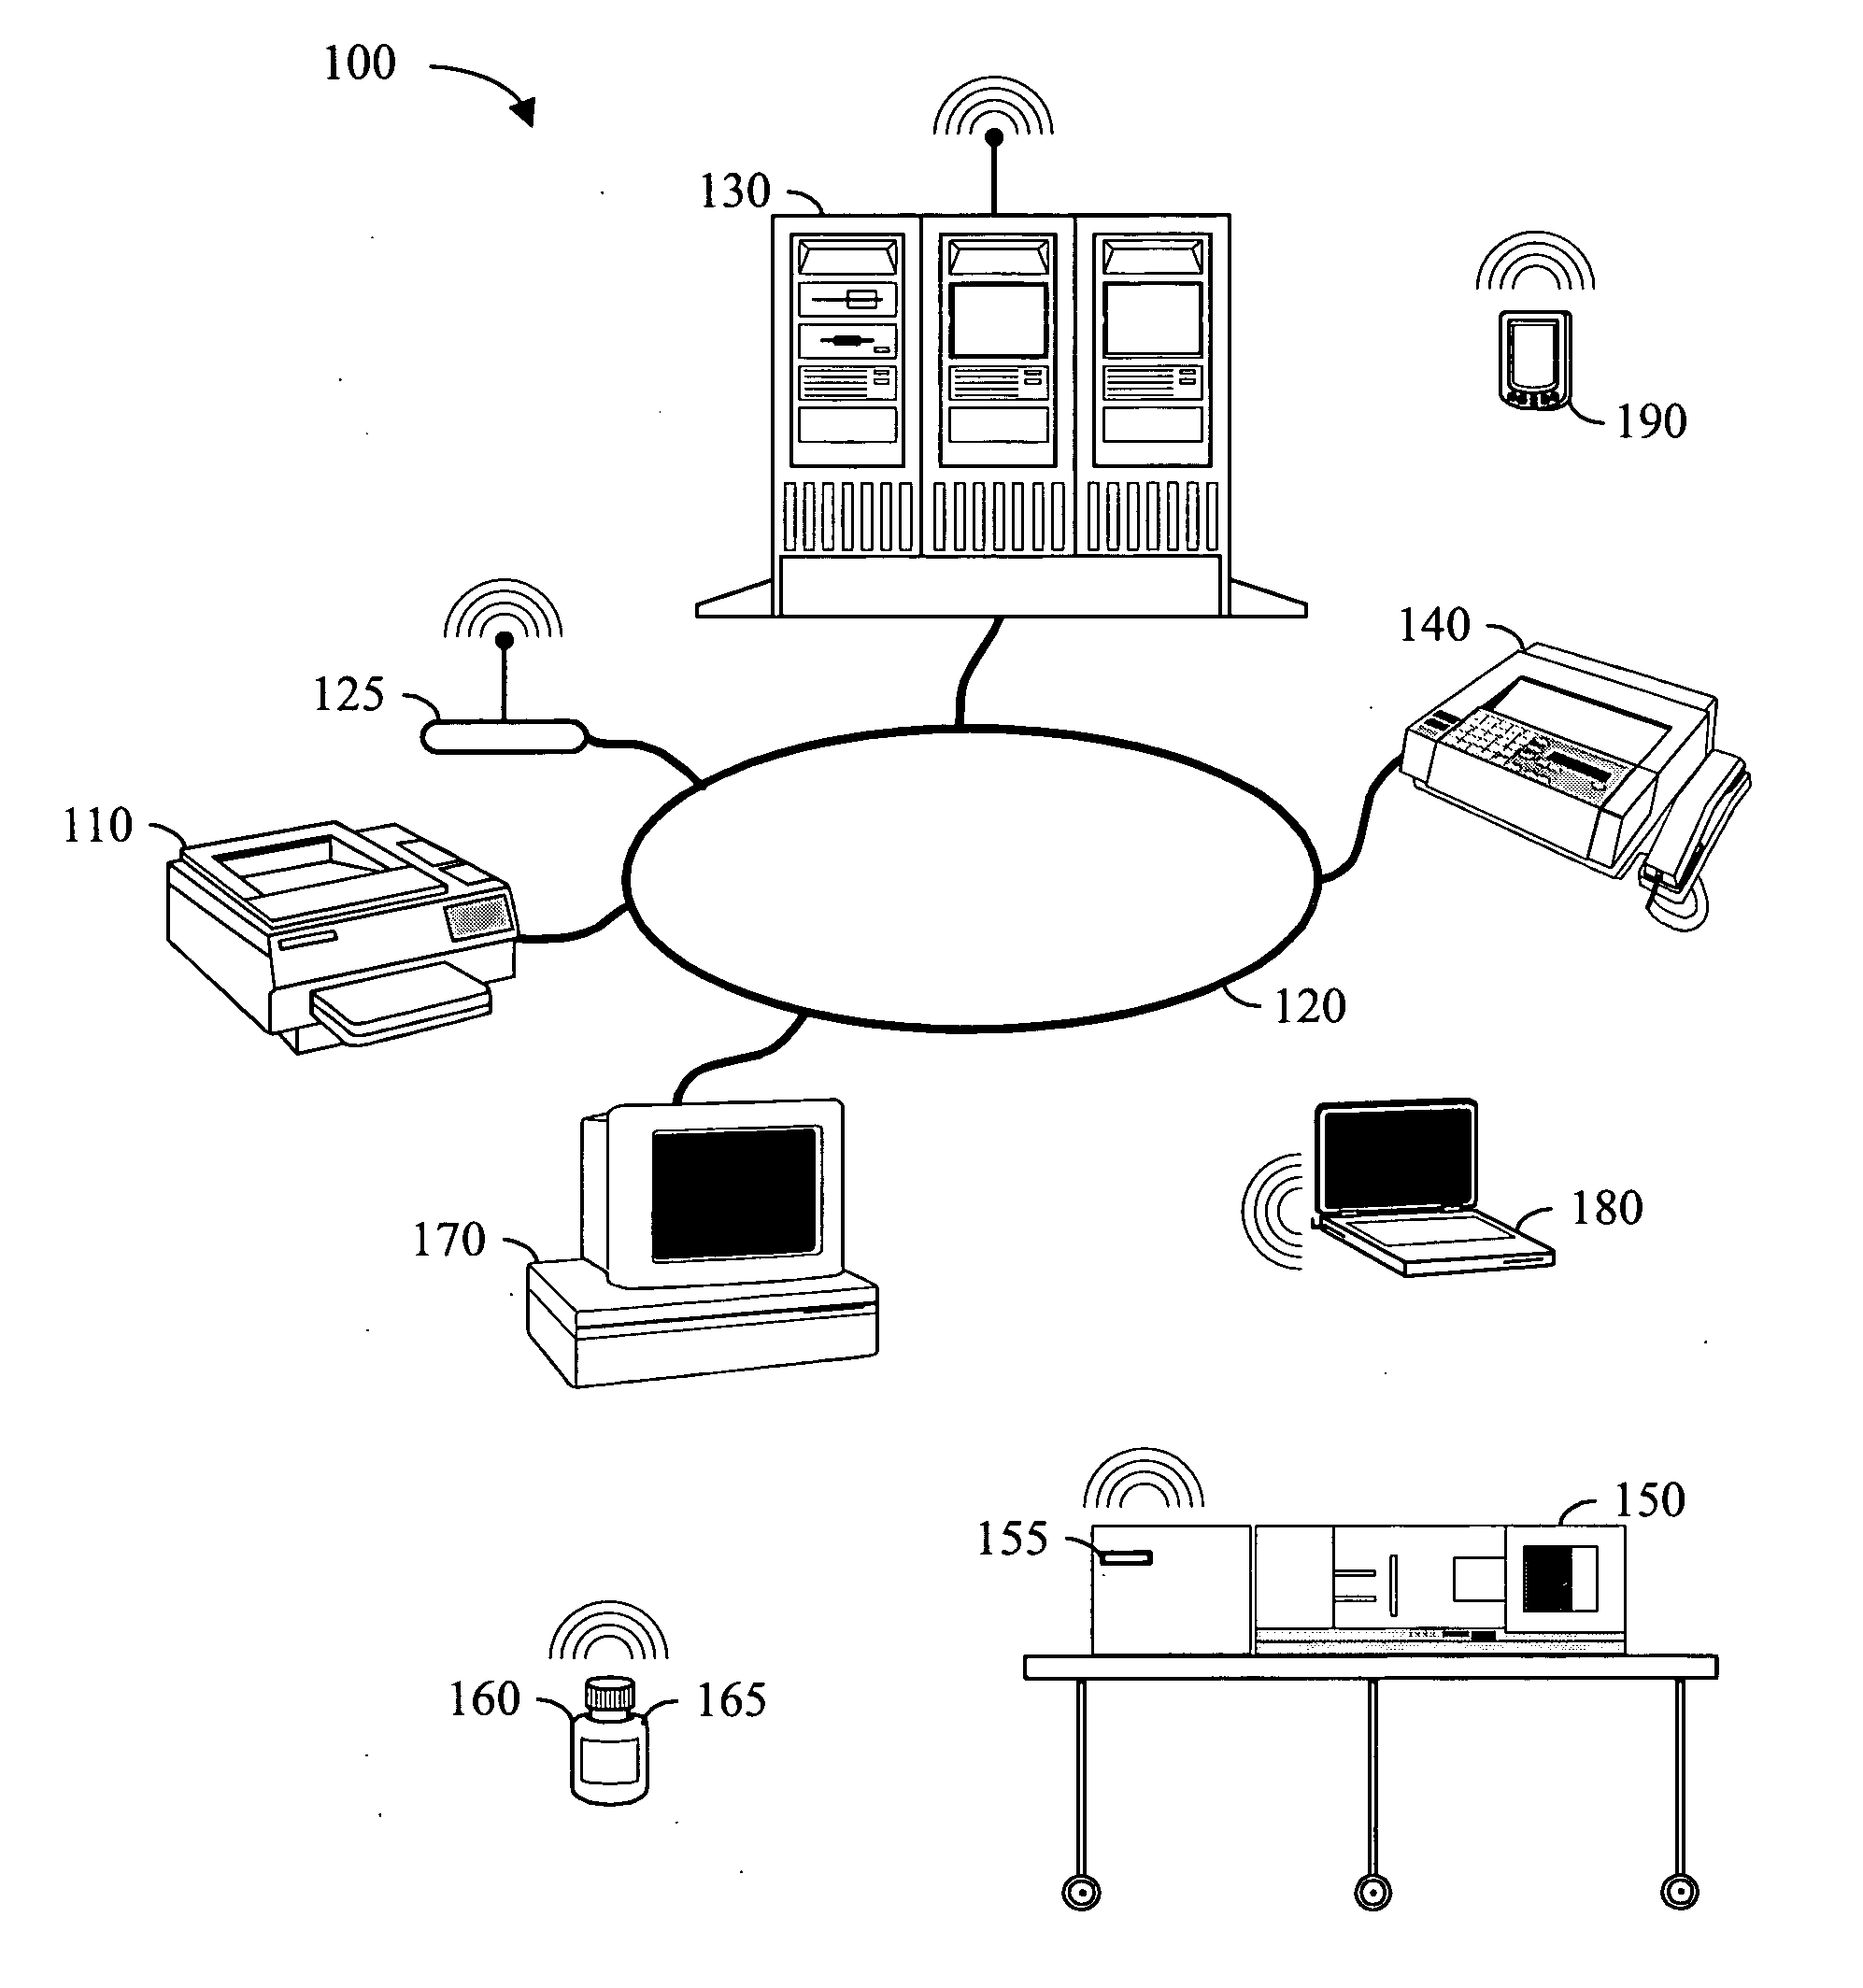 Apparatus and method for integrated healthcare management